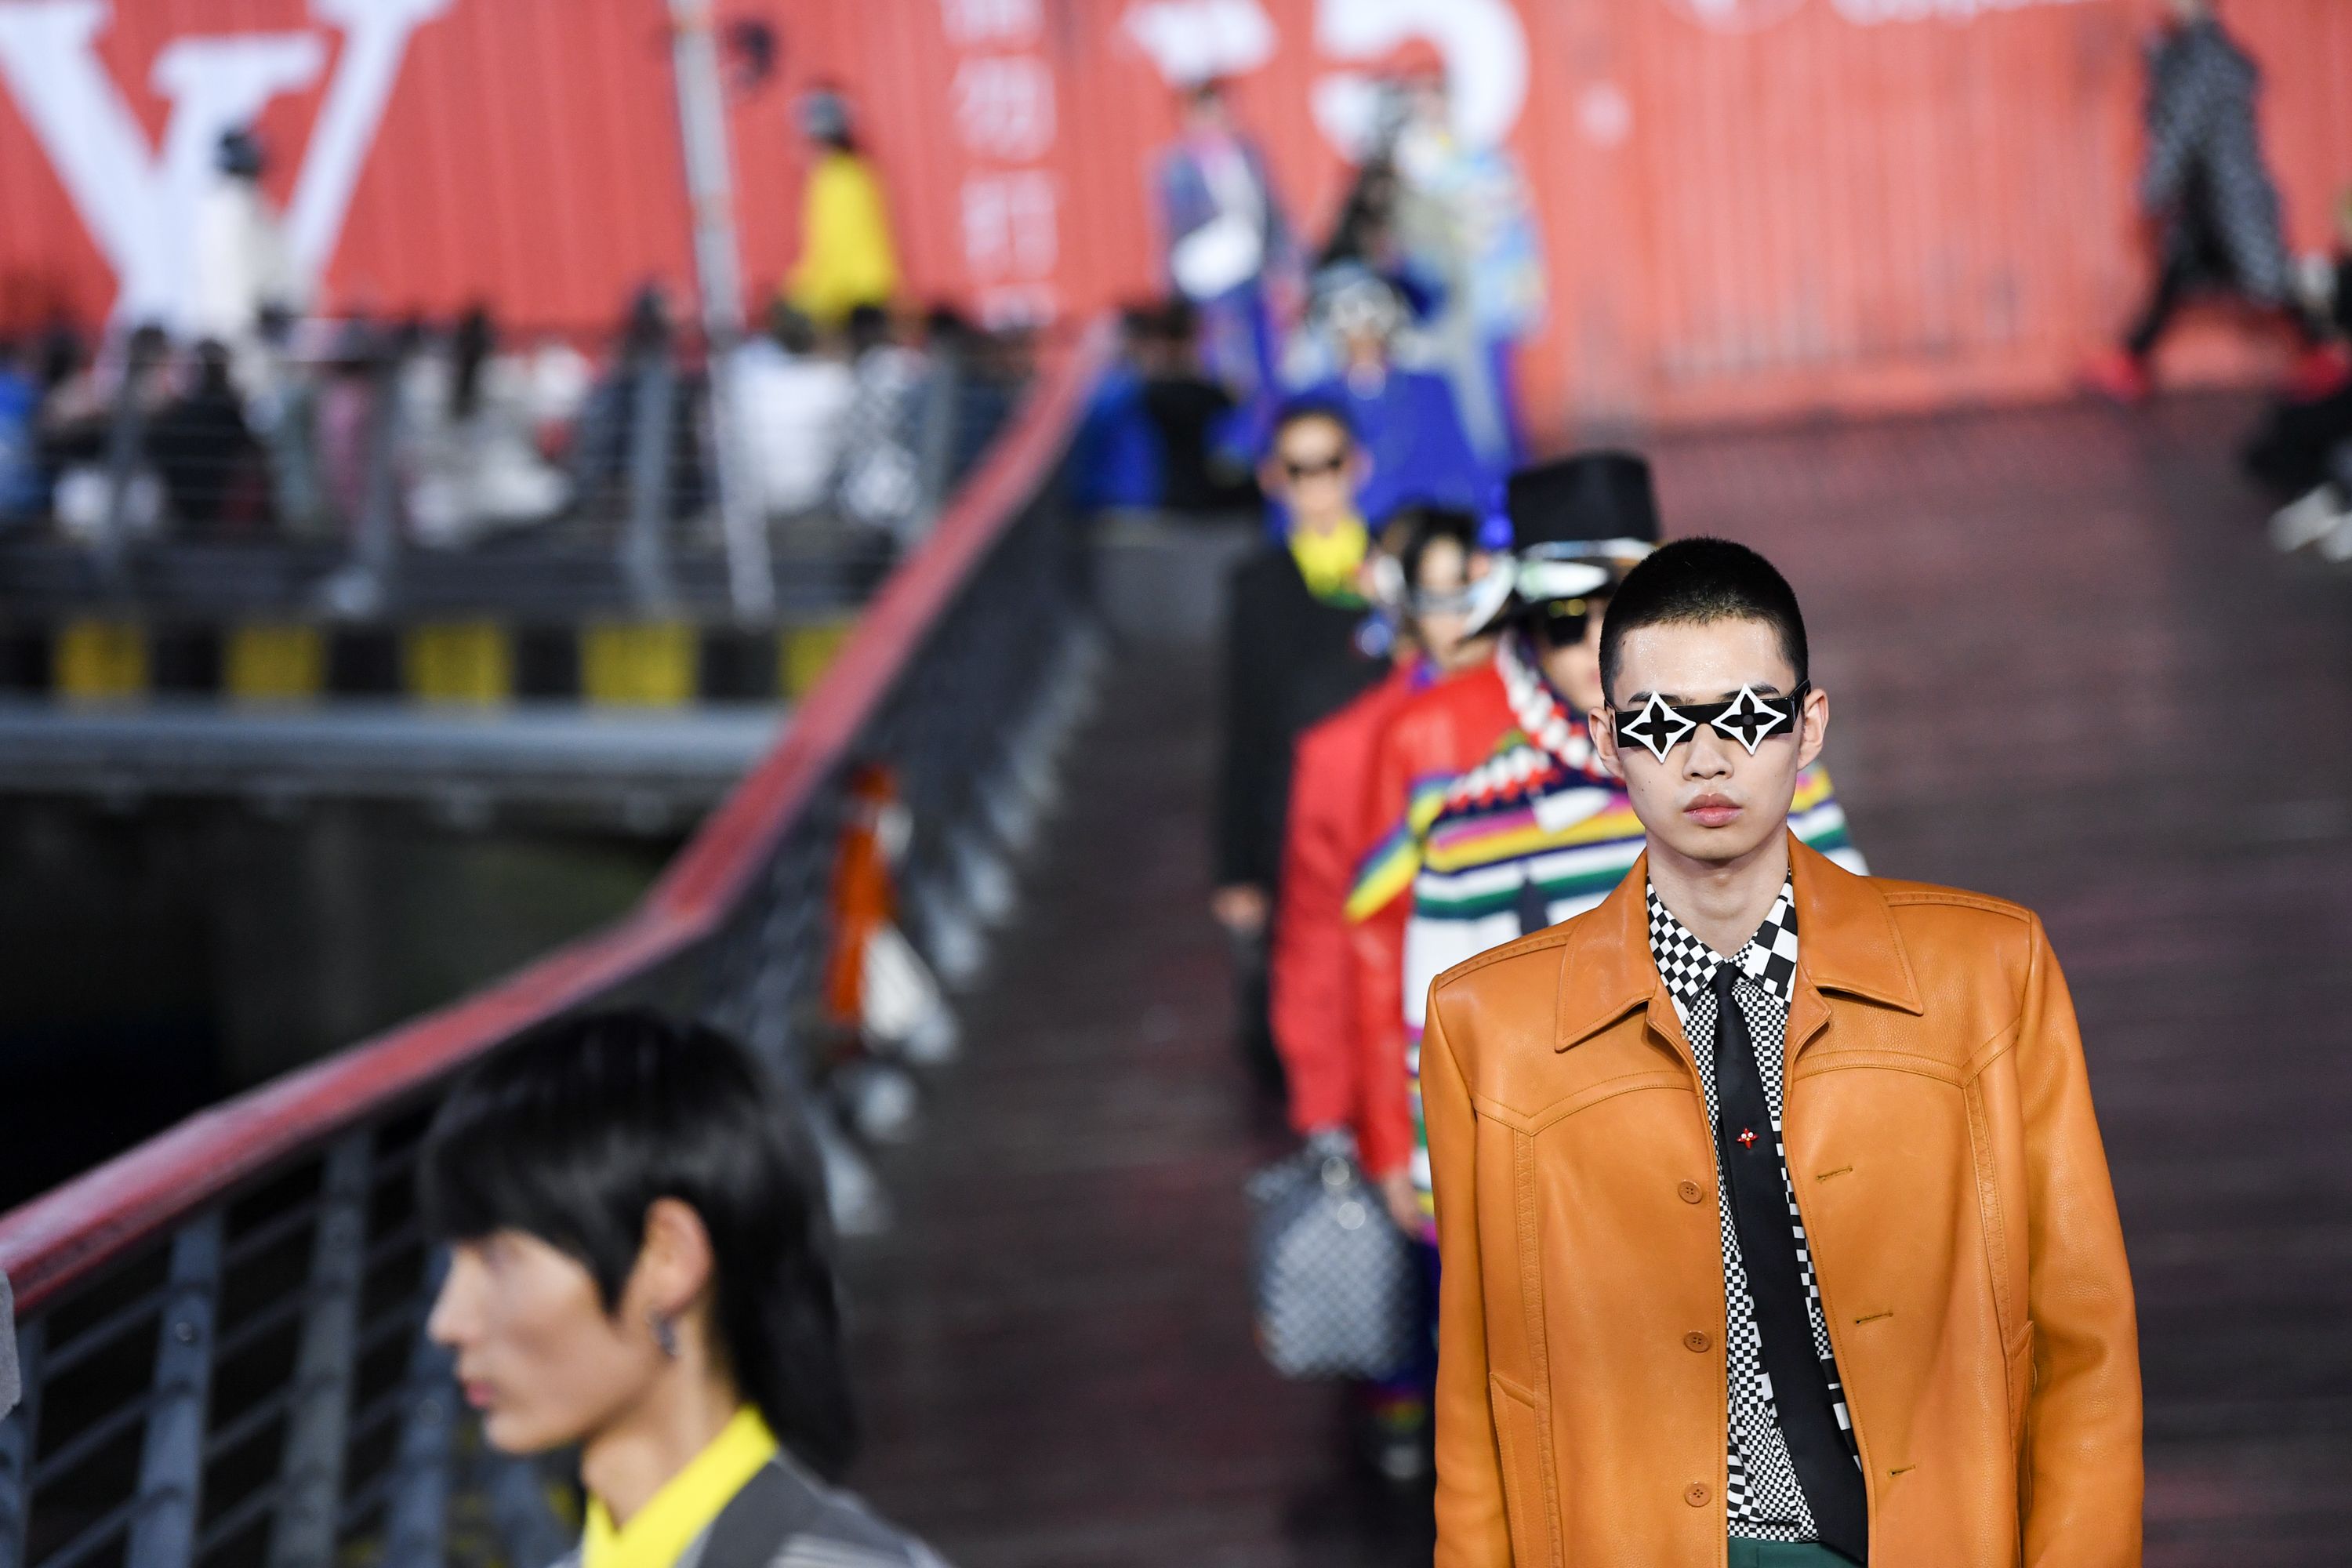 Review of Louis Vuitton Men's Spring Summer 2021 Show In Shanghai